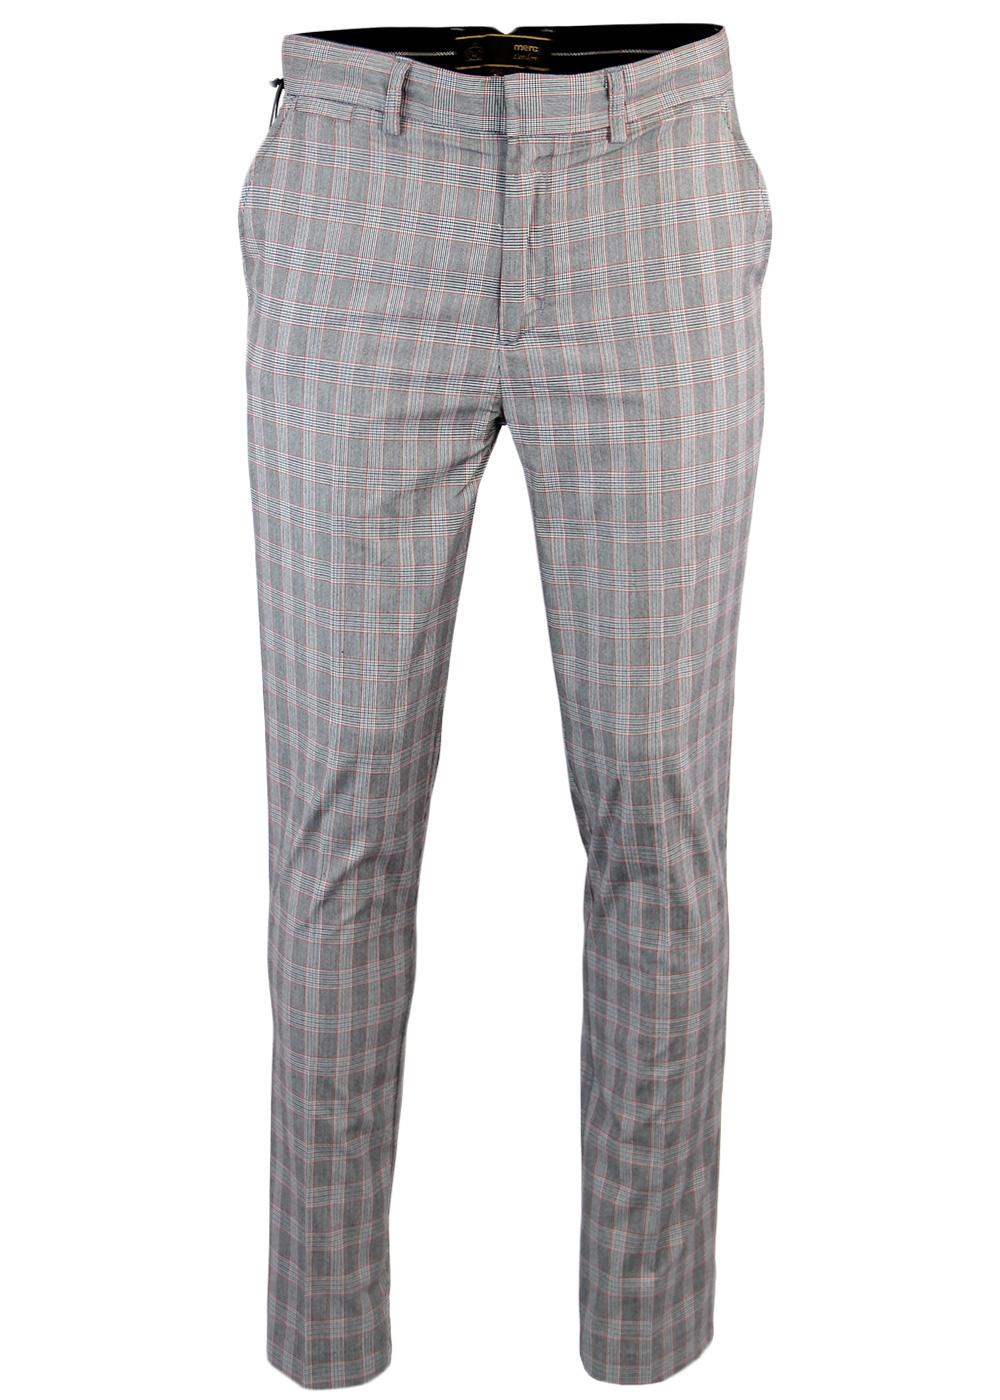 MERC Ronnie Retro Sixties Mod Mens Check Trousers in Grey